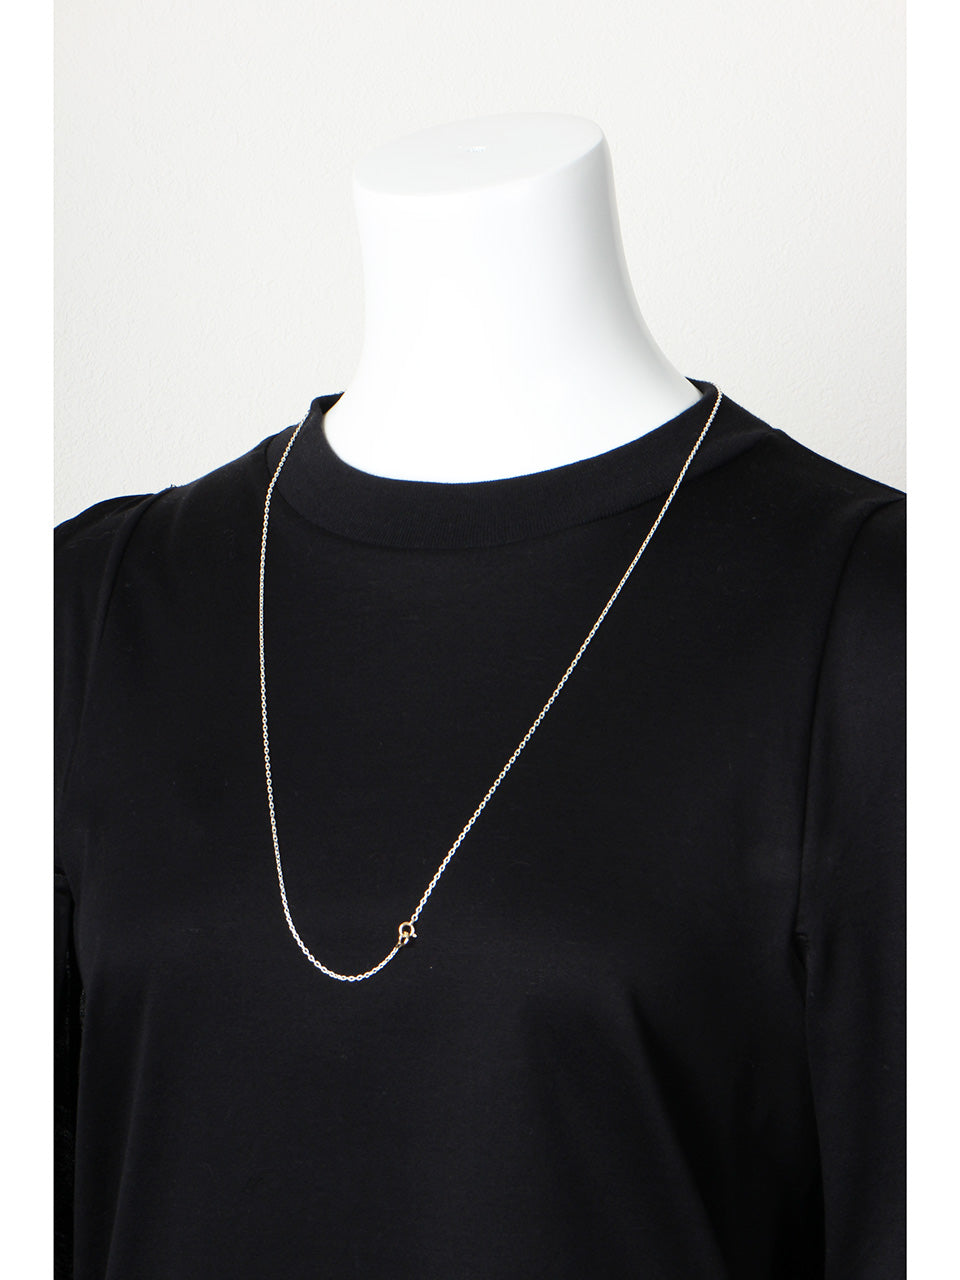 Oval Chain Necklace 70cm